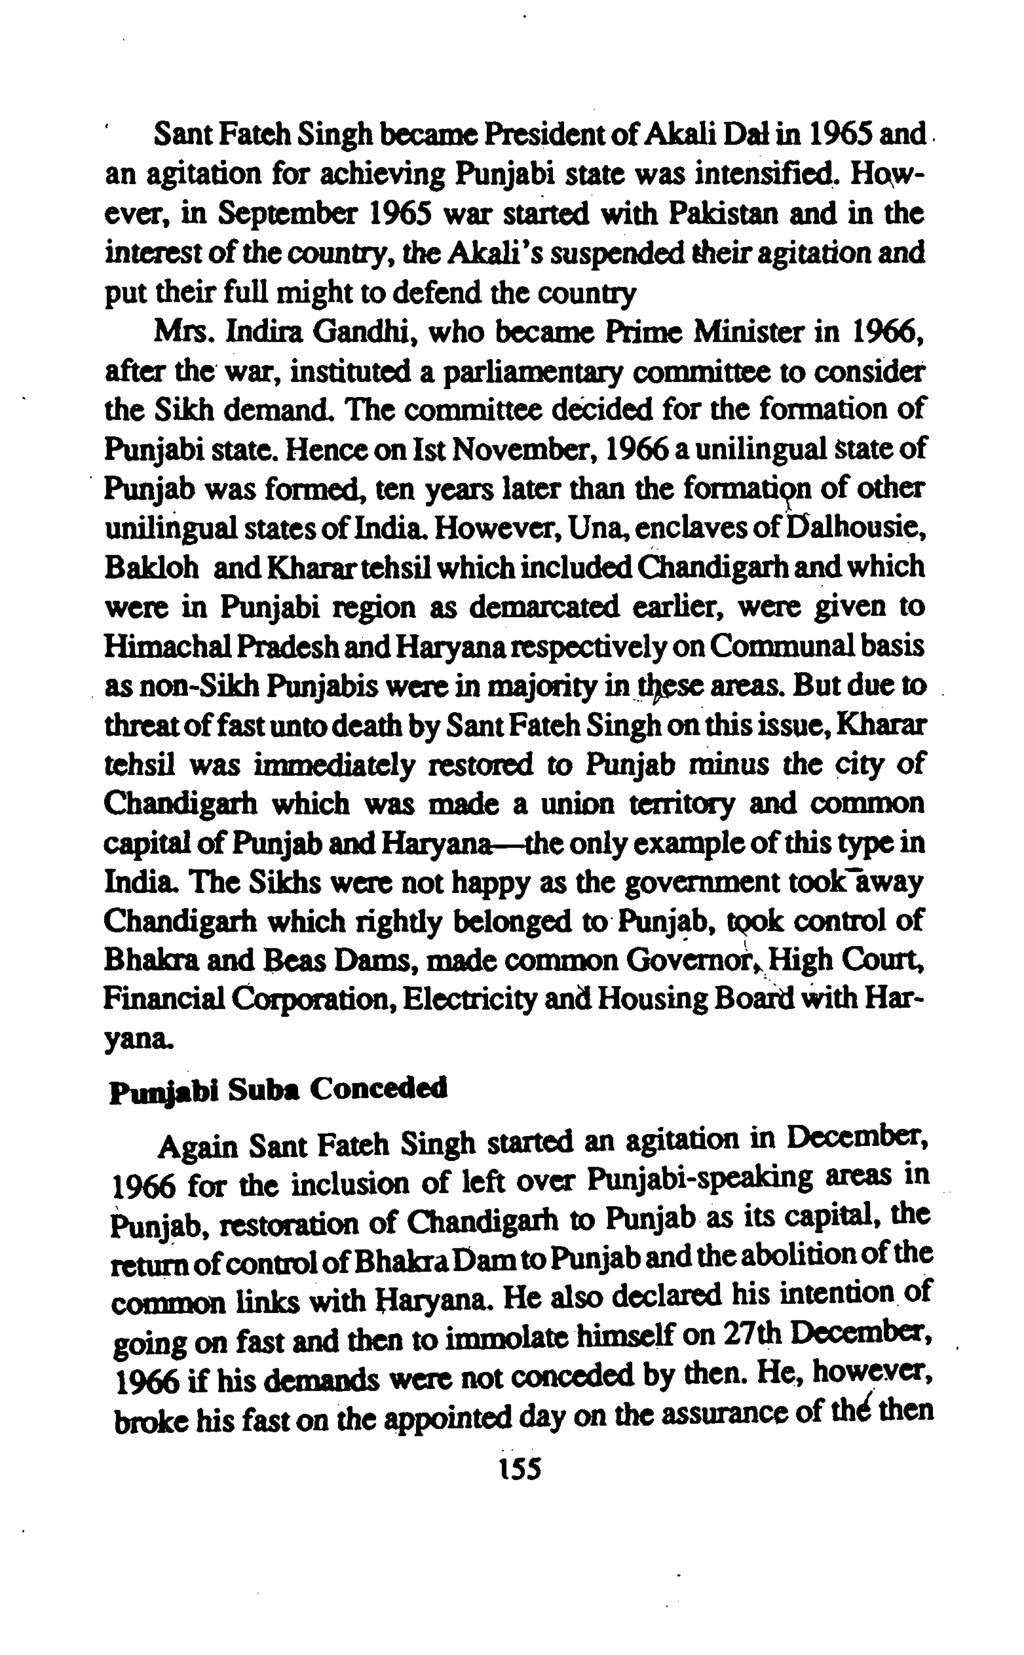 Sant Fateh Singh became President ofakali Dal in 1965 and, an agitation for achieving Punjabi state was intensified. HoWever.